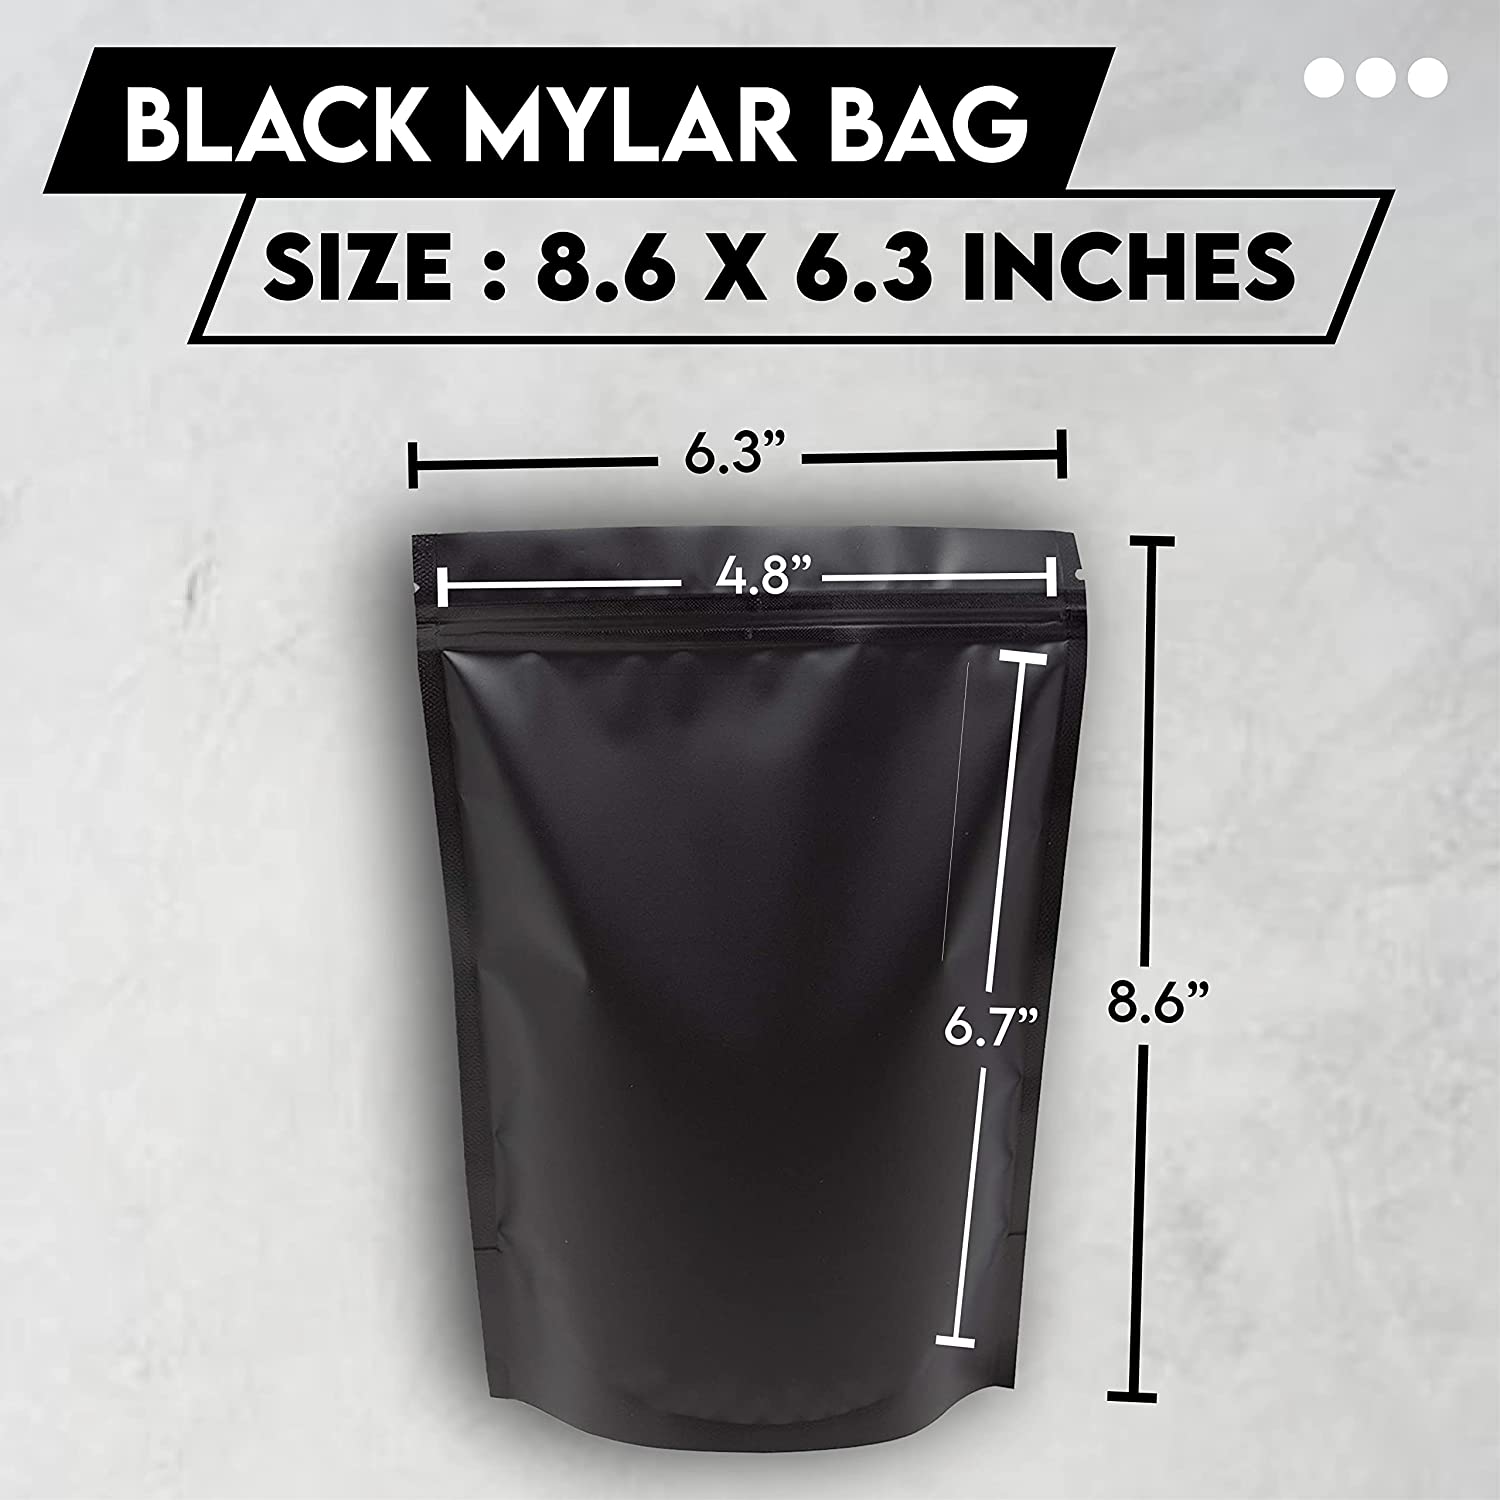 100 PCS Matte Black Mylar Bags - 6.3 x 8.6 Inches Black Resealable Bags  with Standup Gusset - Black Mylar Food Storage Ziplock Bags Vacuum Seal for  Tea, Coffee, Beans and more 